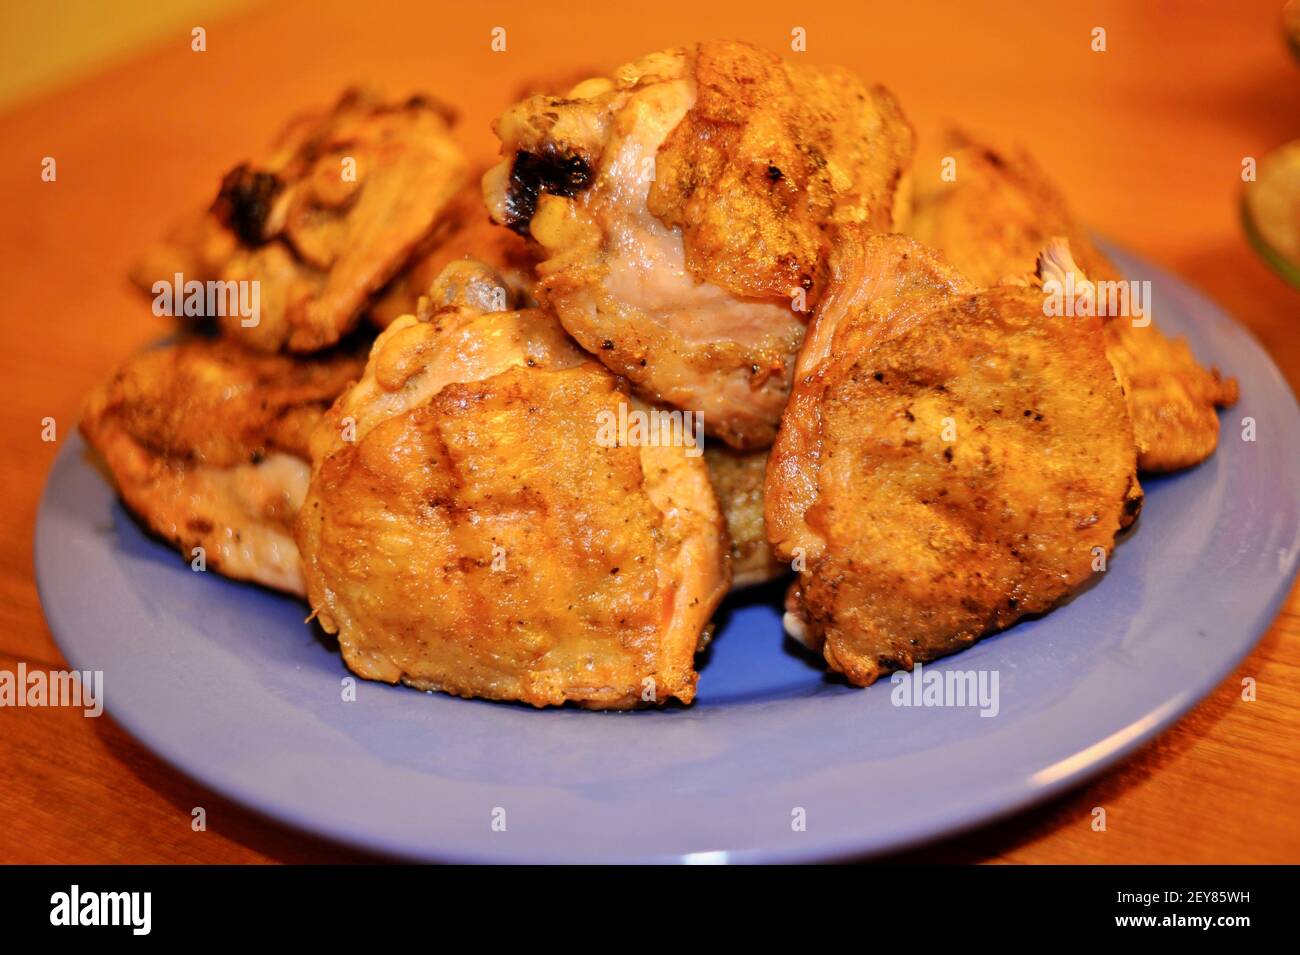 A plated of delicious freshly grilled, golden-brown, cooked marinaded chicken on an outdoor barbecue gas grill, California, USA Stock Photo